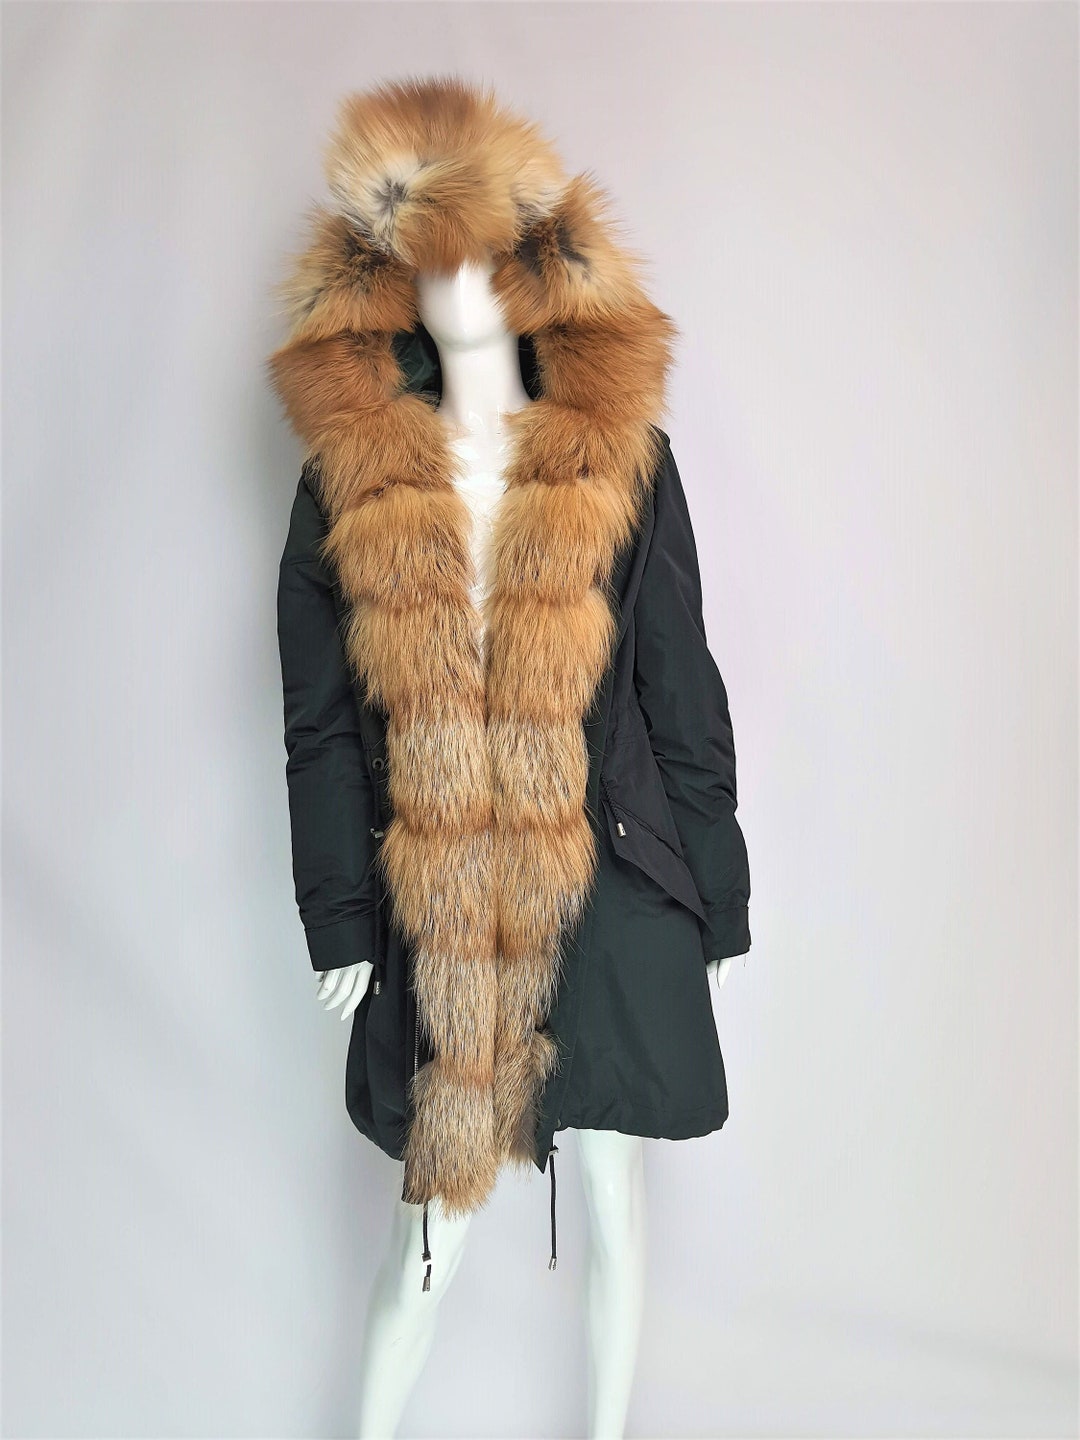 Fur Parka Made From Real Gold Fox Fur - Etsy